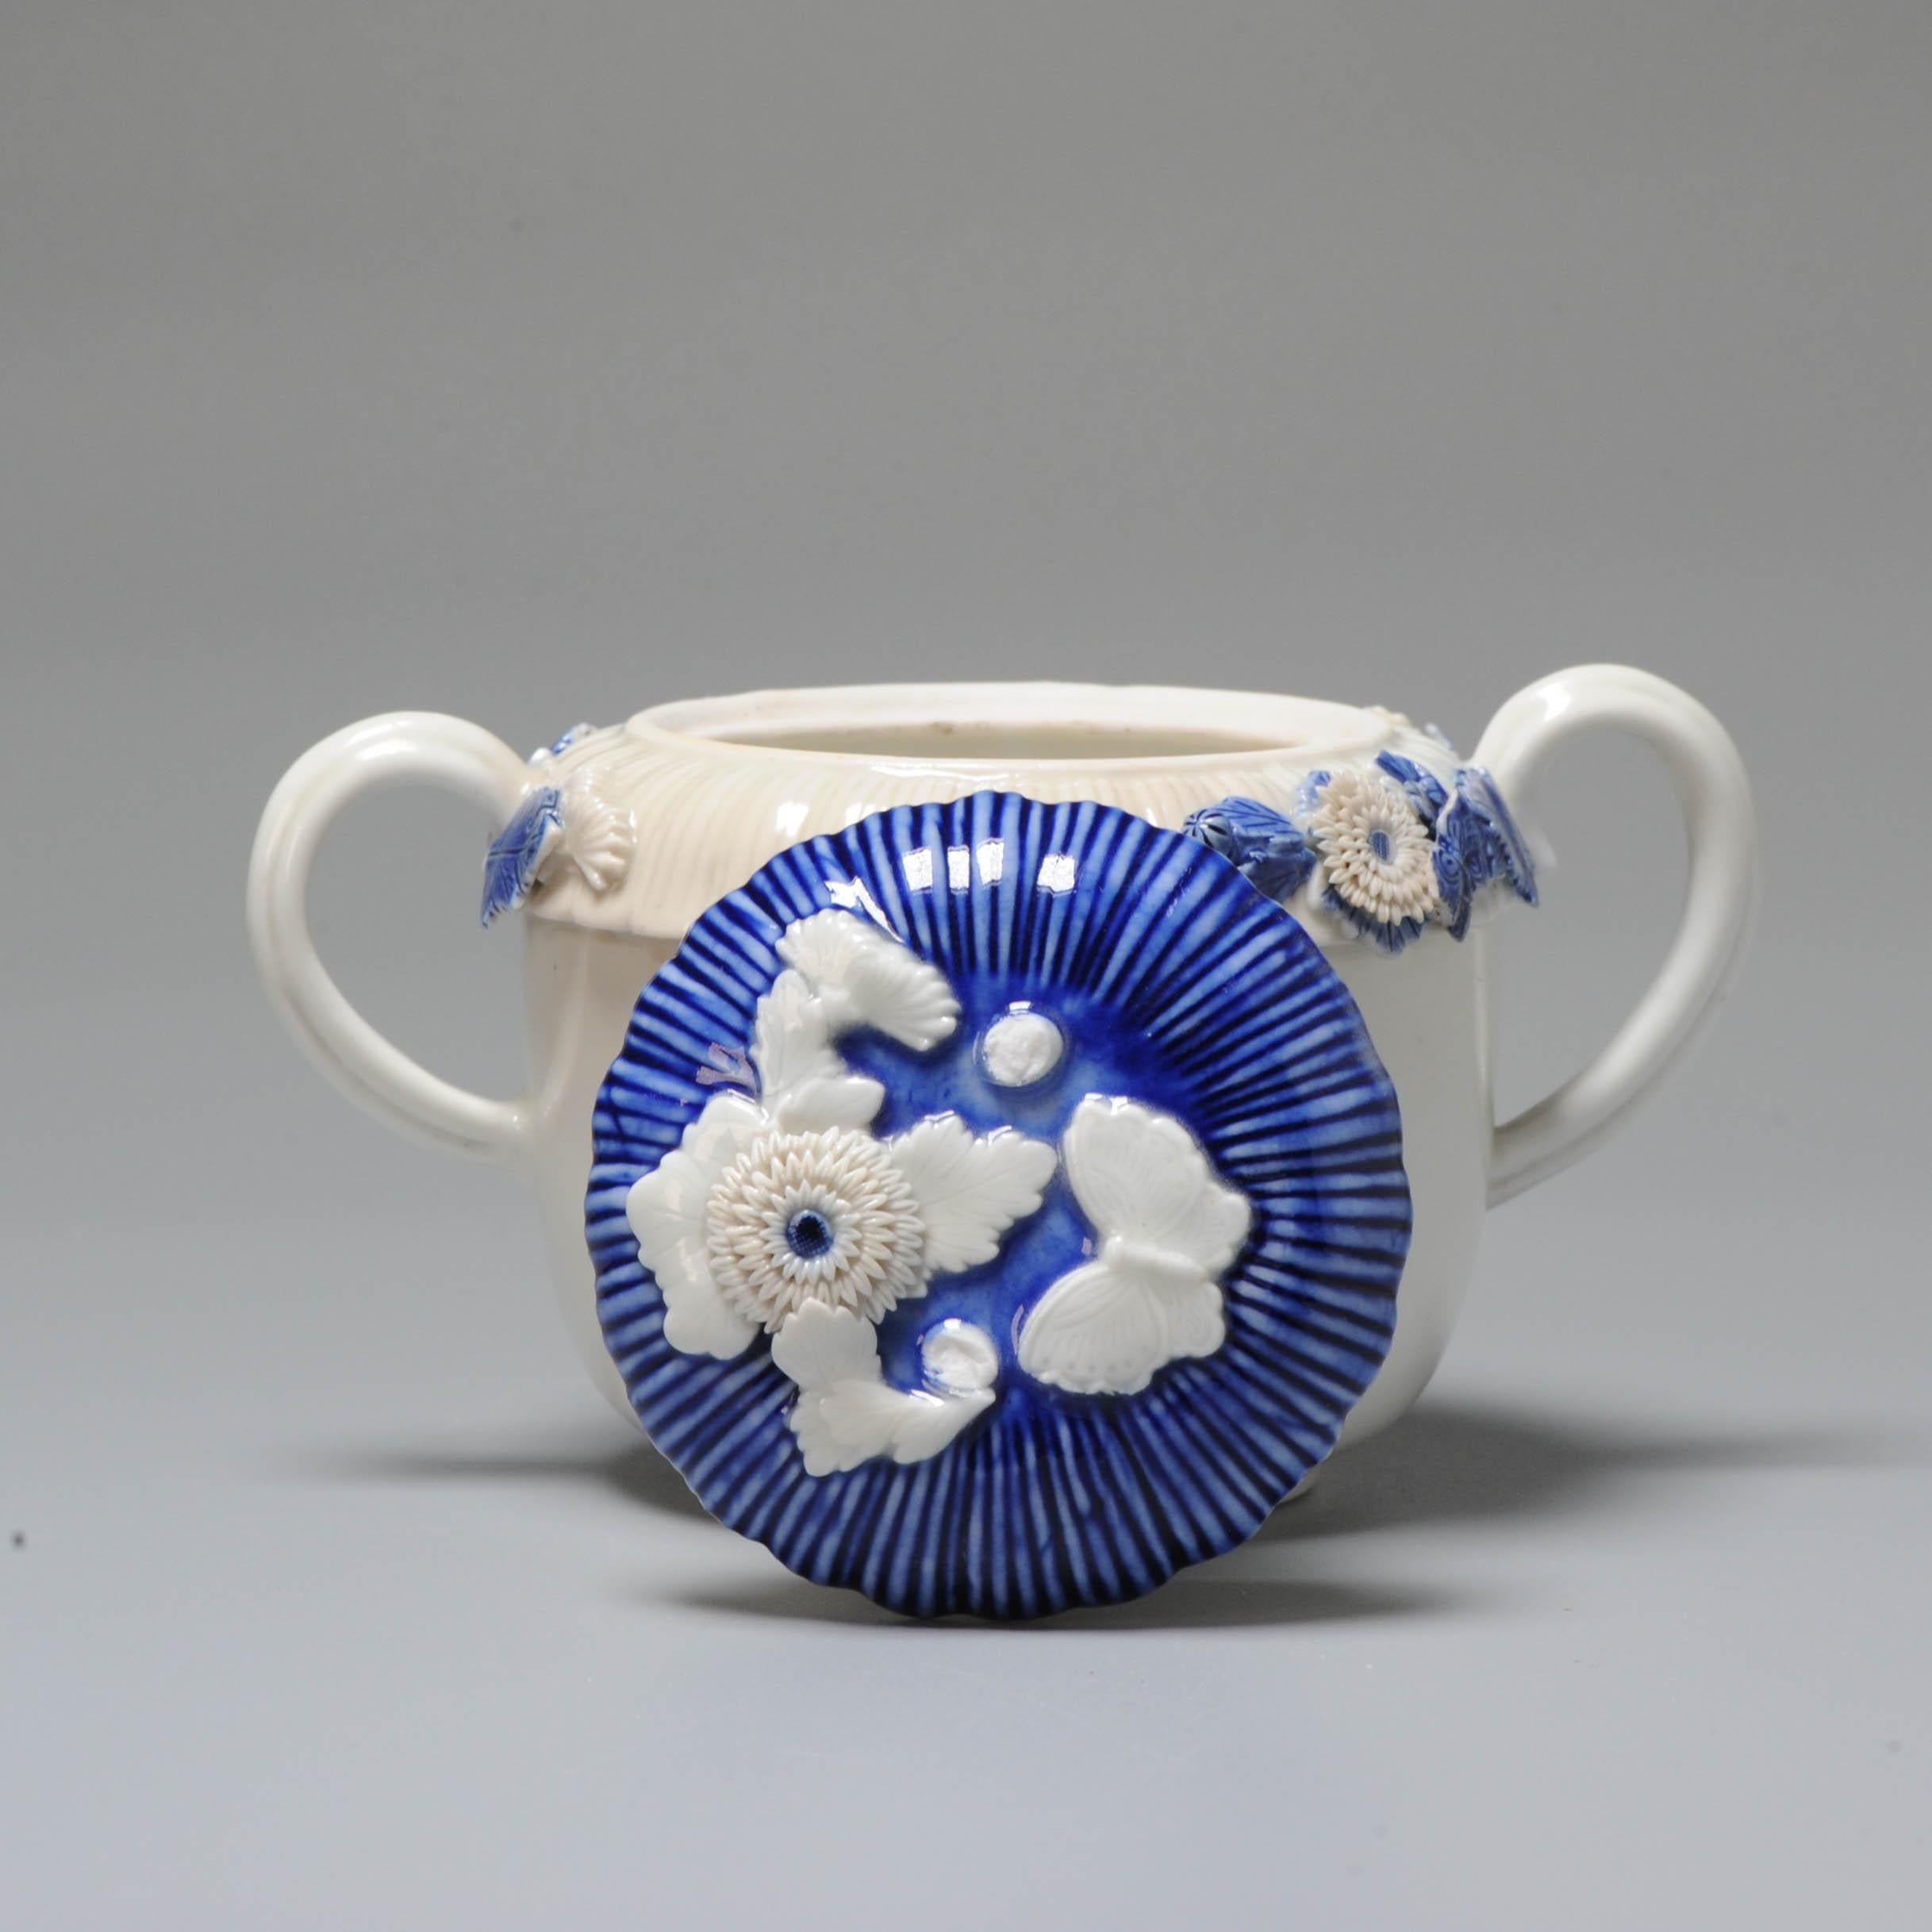 Antique Meiji Period Japanese Hirado Sugar Pot with Flower Appliques, 19th Cen In Good Condition For Sale In Amsterdam, Noord Holland